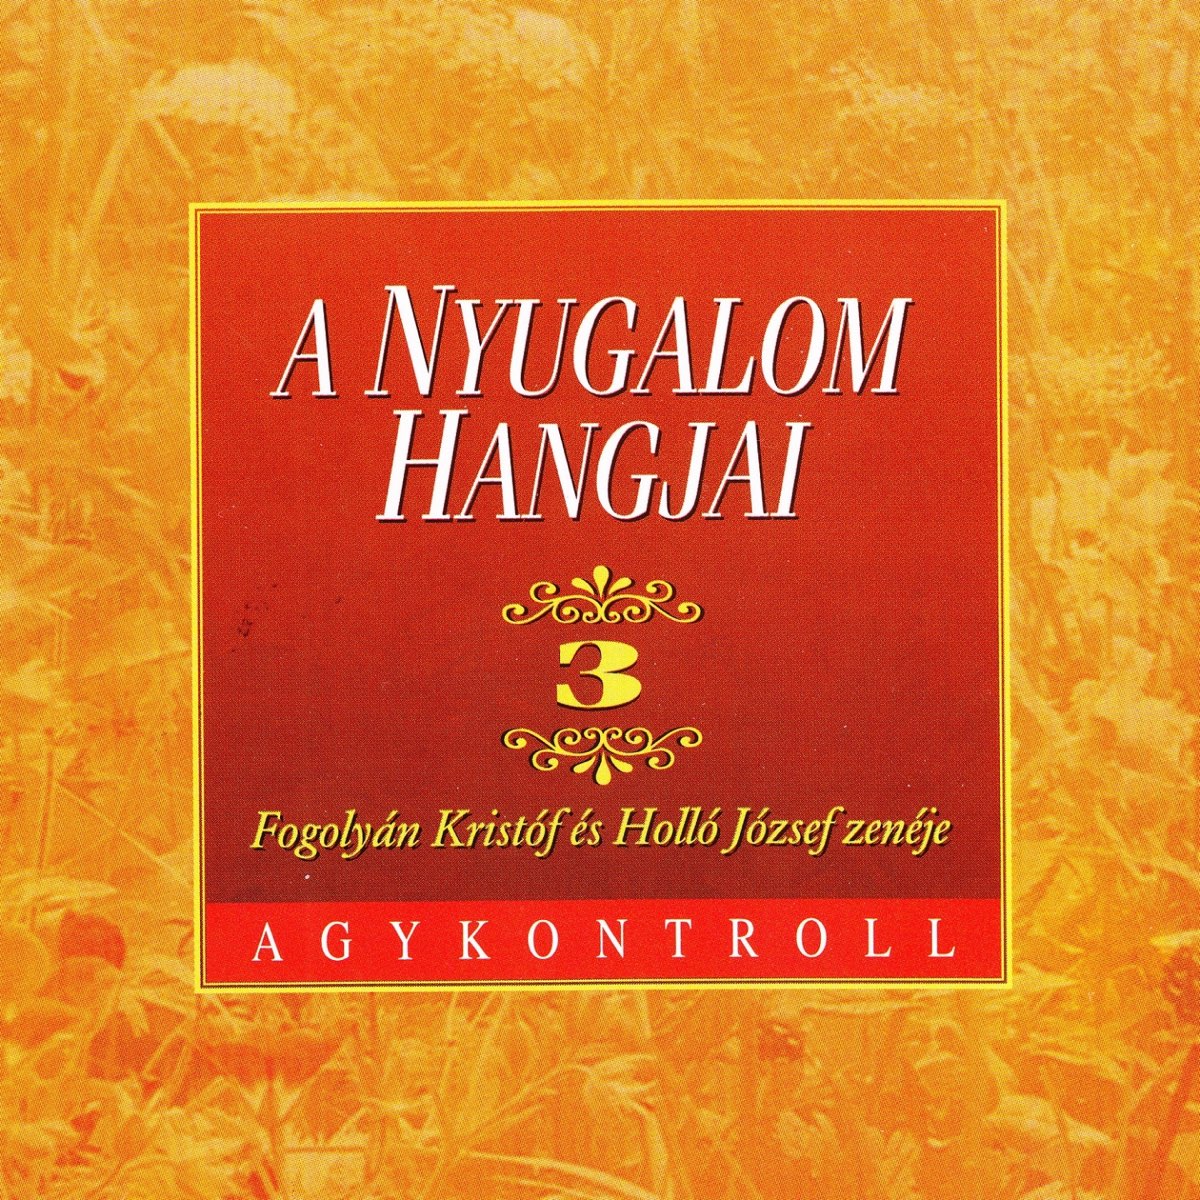 A Nyugalom Hangjai, Vol. 3 by Agykontroll on Apple Music